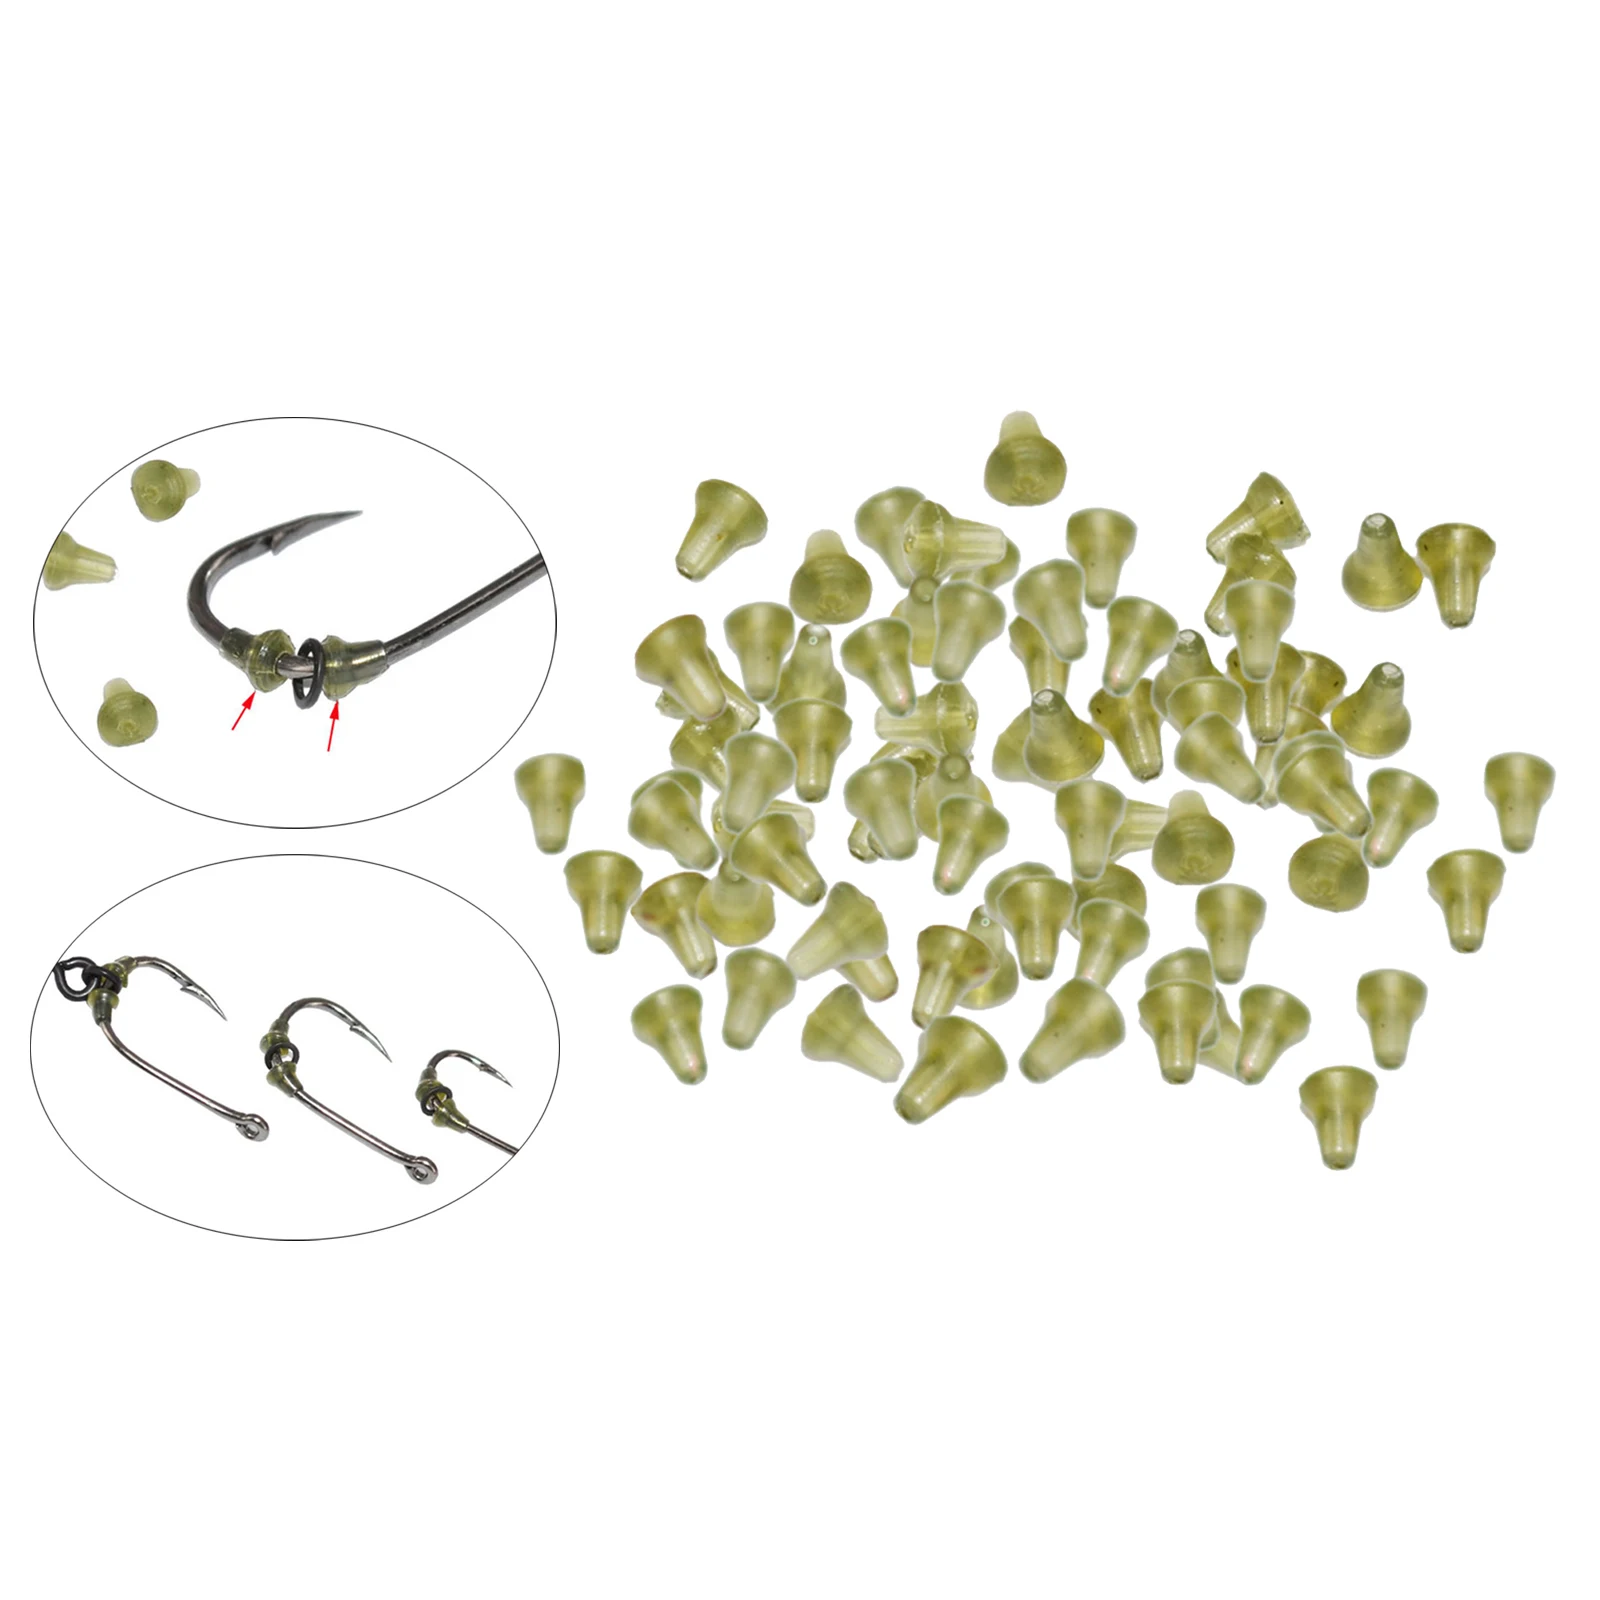 100PCS Carp Fishing Accessories Hook Stop Bead Stopper Carp Rig Rubber Beads for Hooks Stopper Fishing Tackle Tool